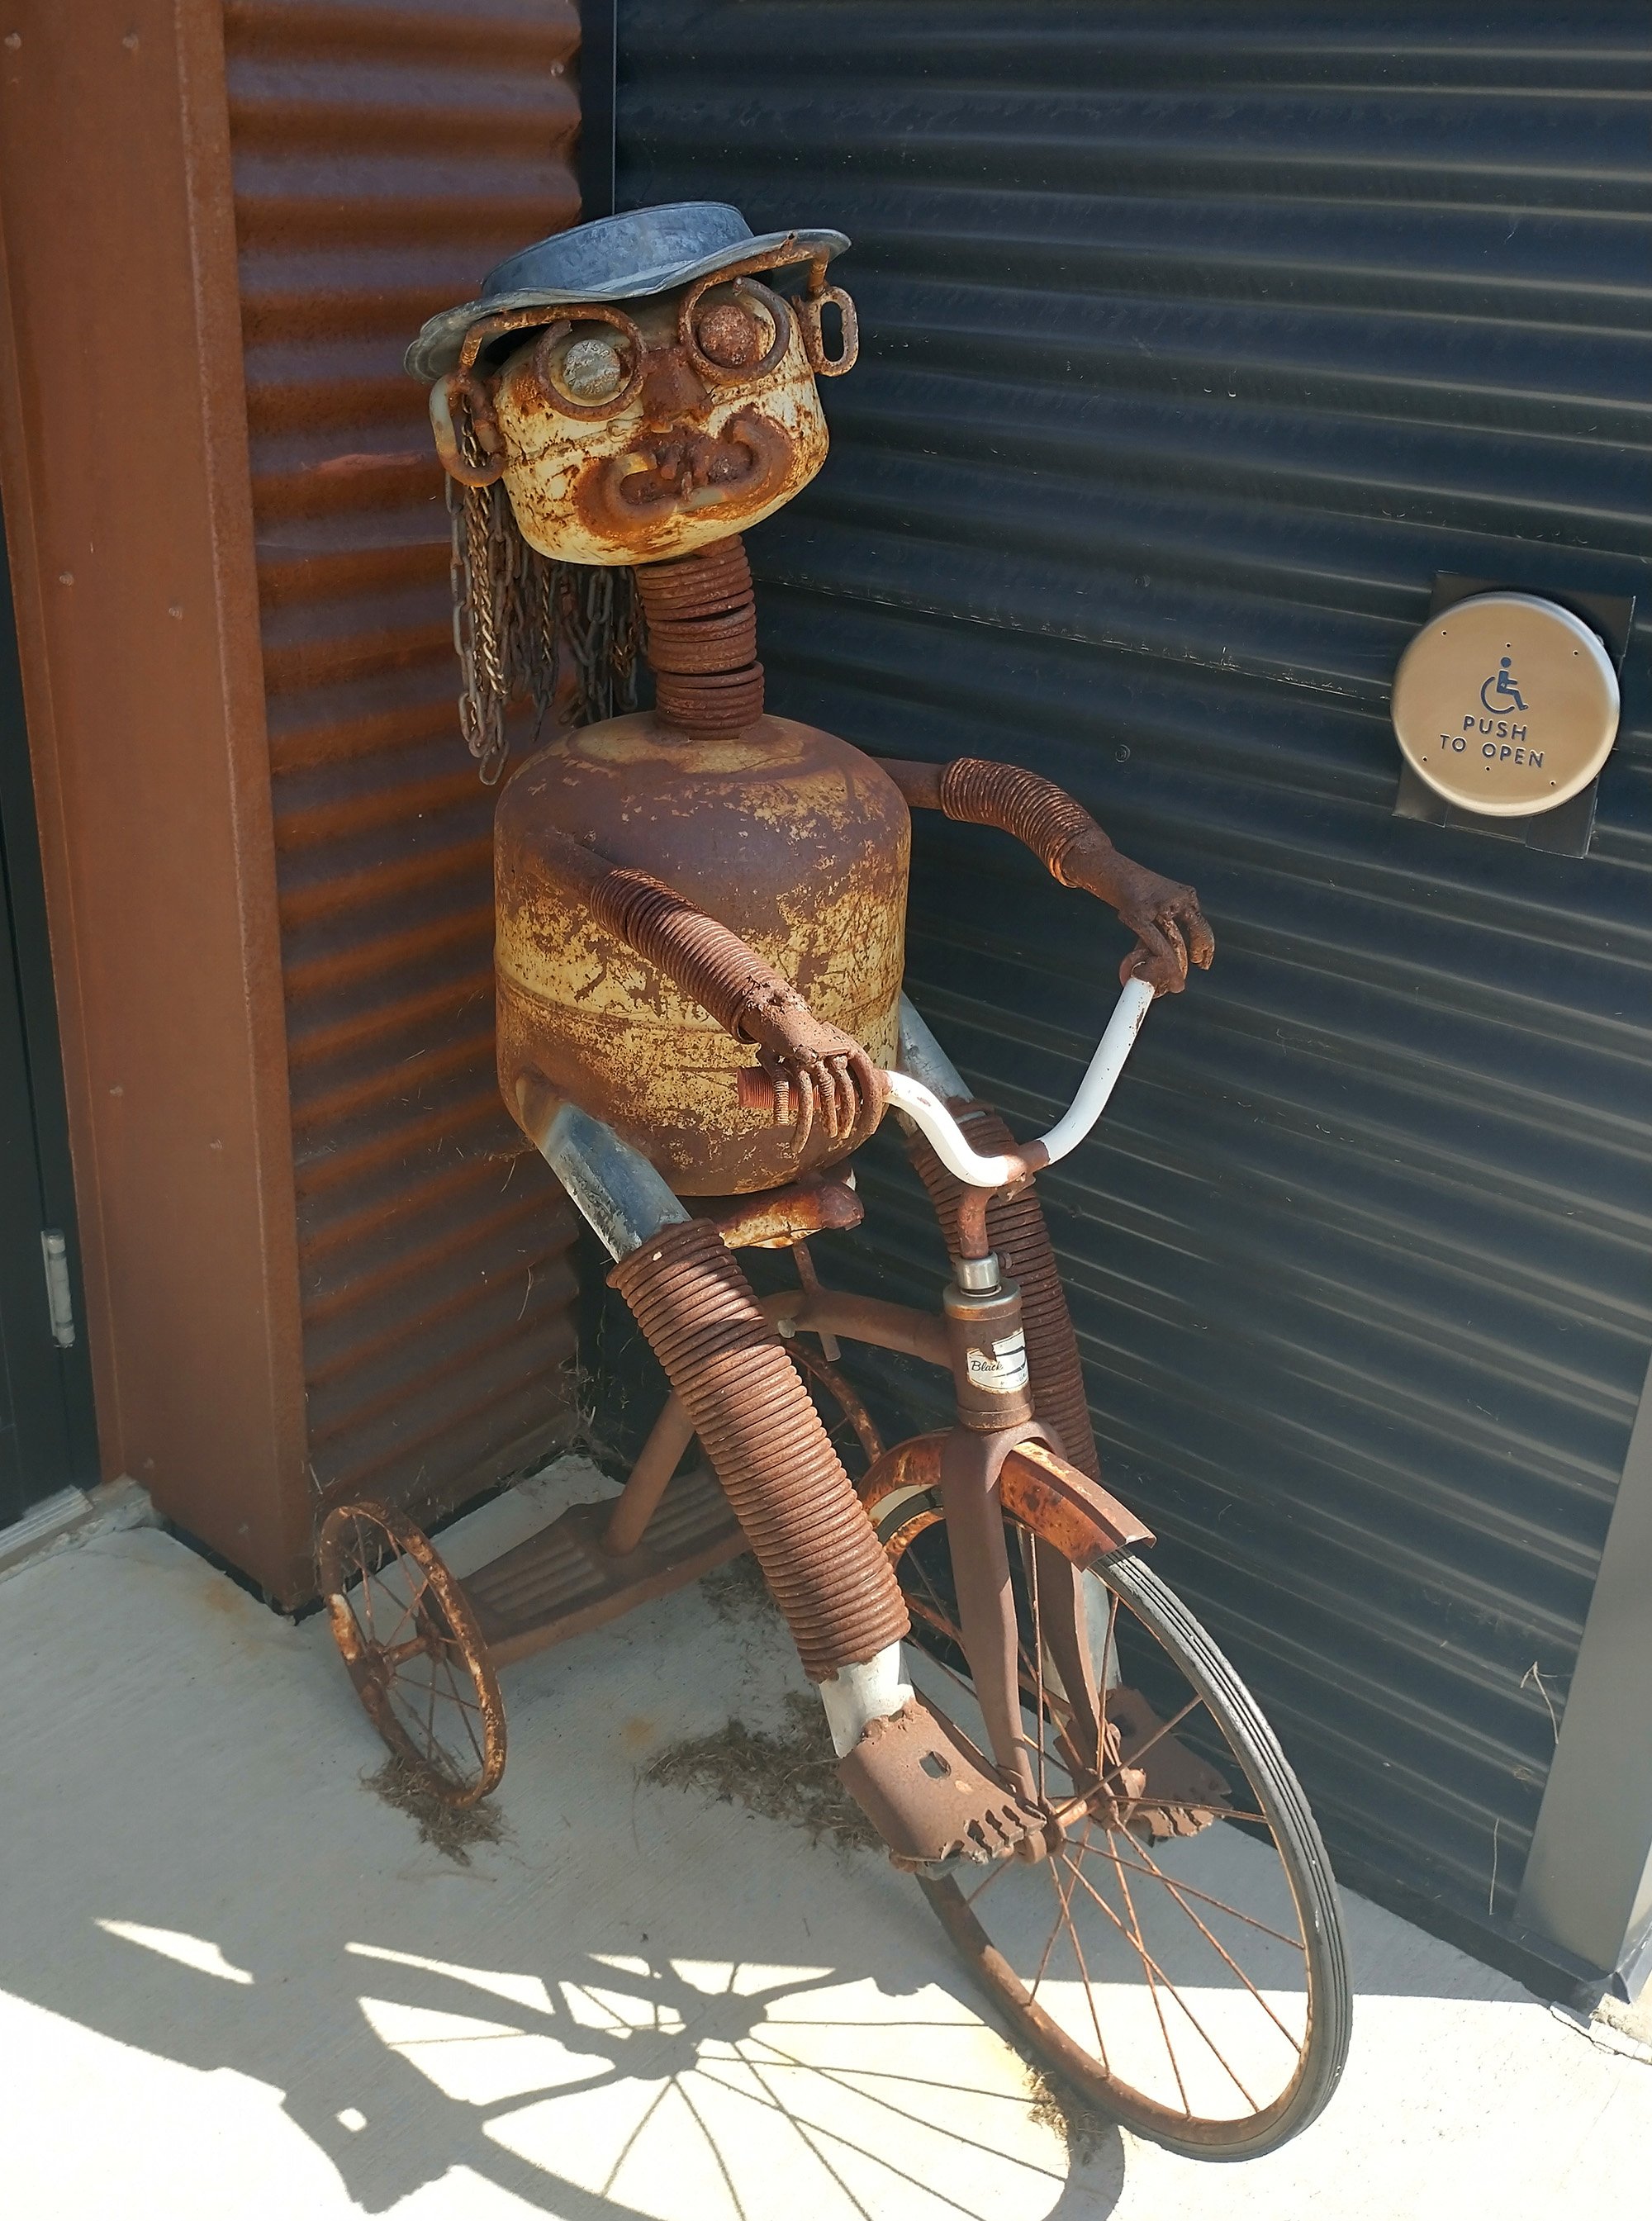 Little creepy tricycle robot hanging out in the doorway. Why did you make this, person? Why?